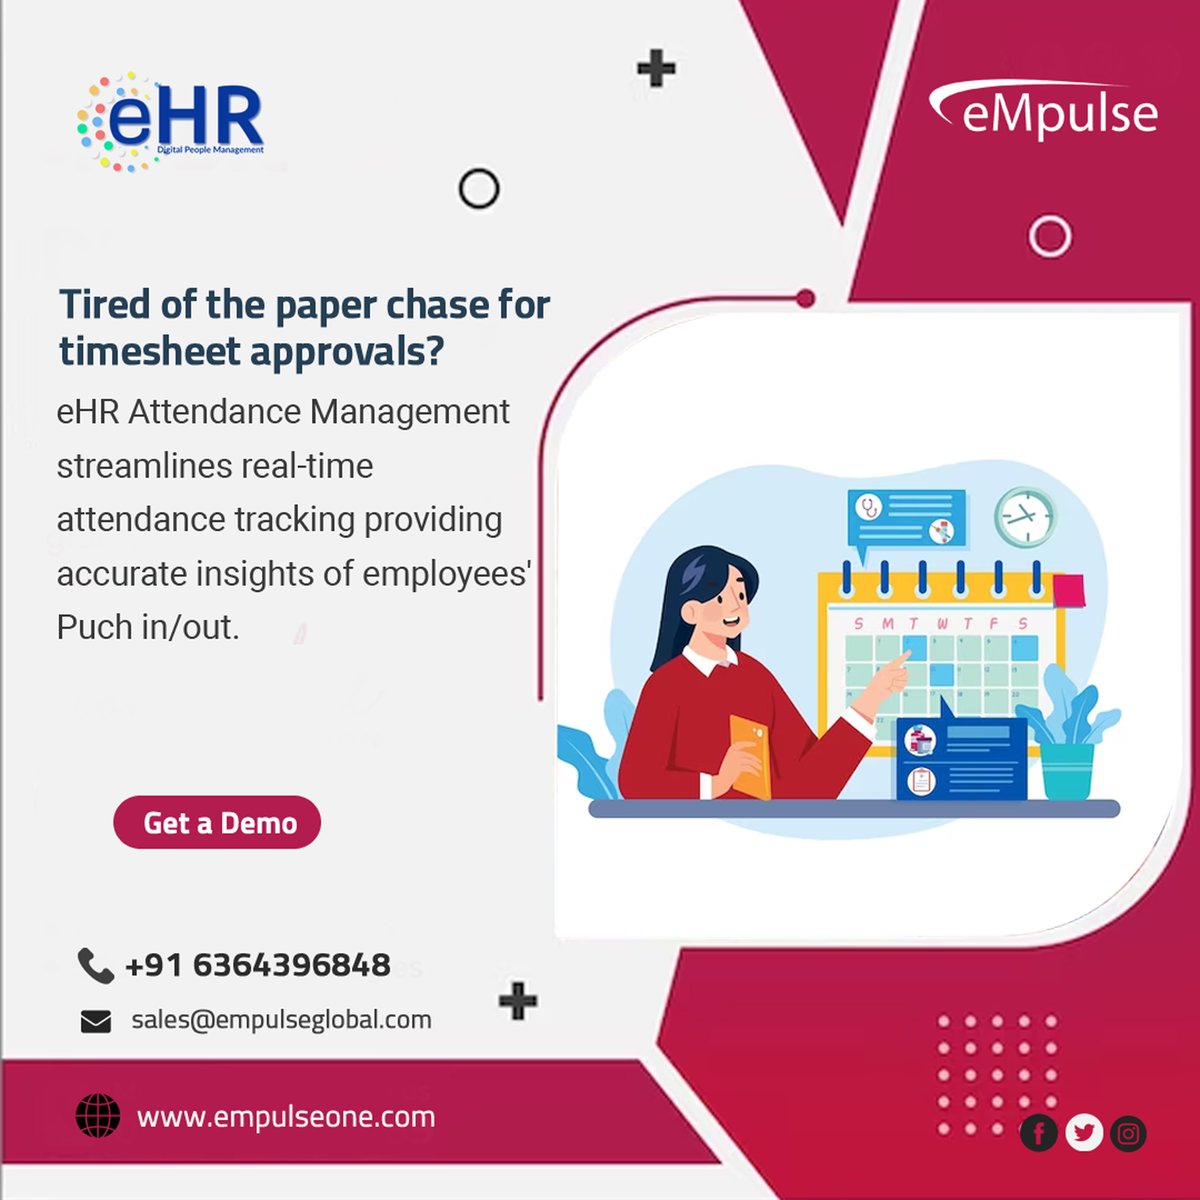 Tired of paper chase for timesheet approvals?
eHR Attendance Management streamlines real-time attendance tracking providing accurate insights of employees Puch in/out.

Call: +916364396848
Site: empulsehrsolutions.com

#eHR #empulseehrsoftware #attendancemanagement #DigitalHRMS